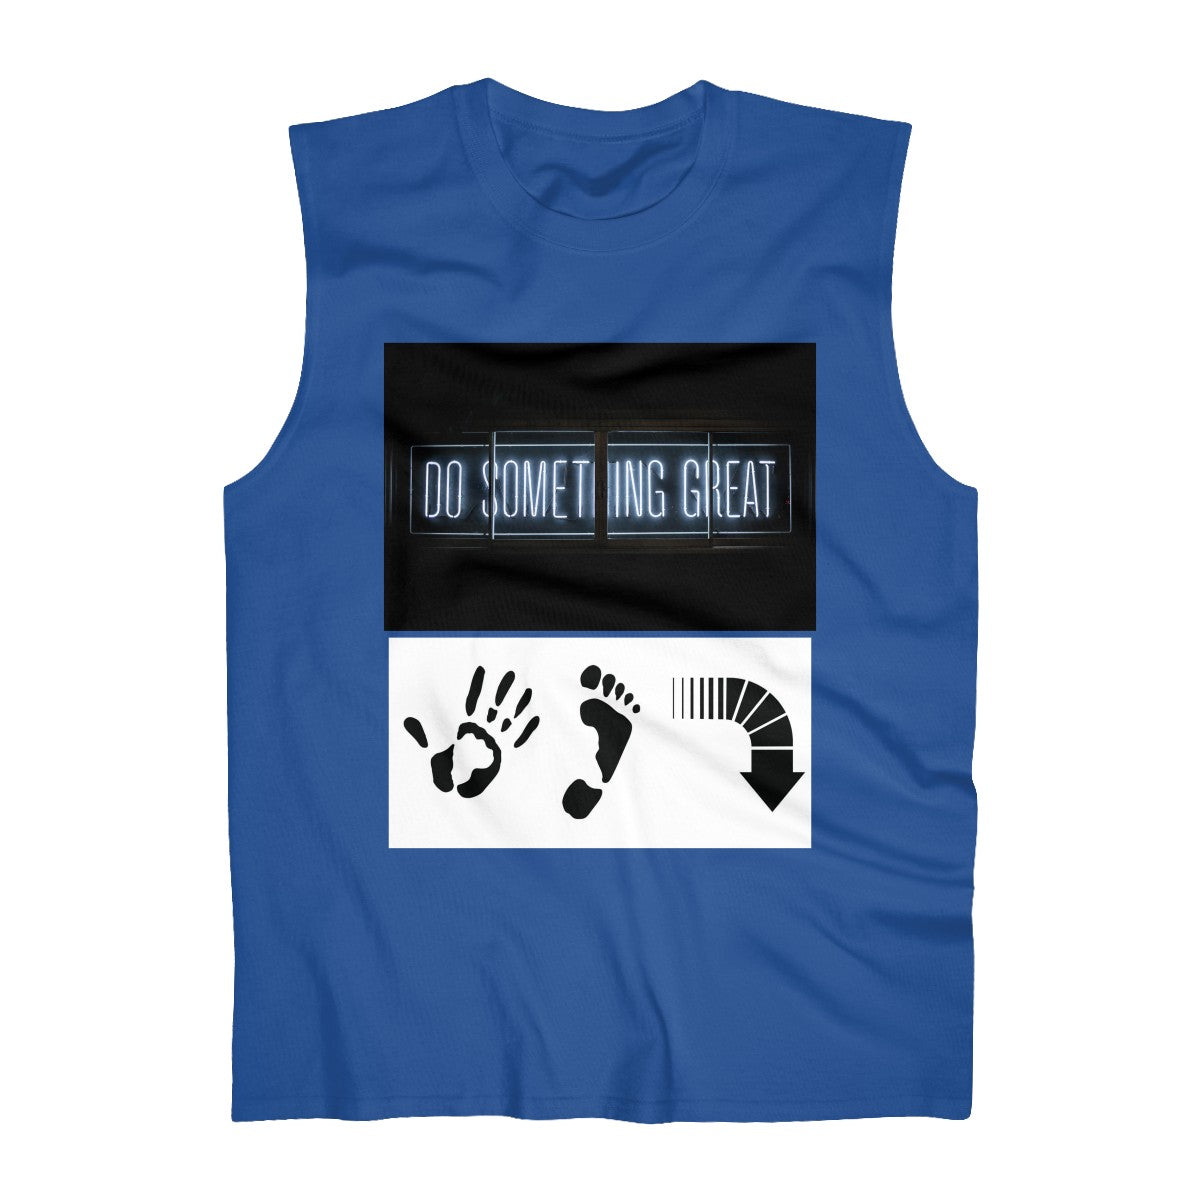 Five Toes Down Something Great Sleeveless Tank